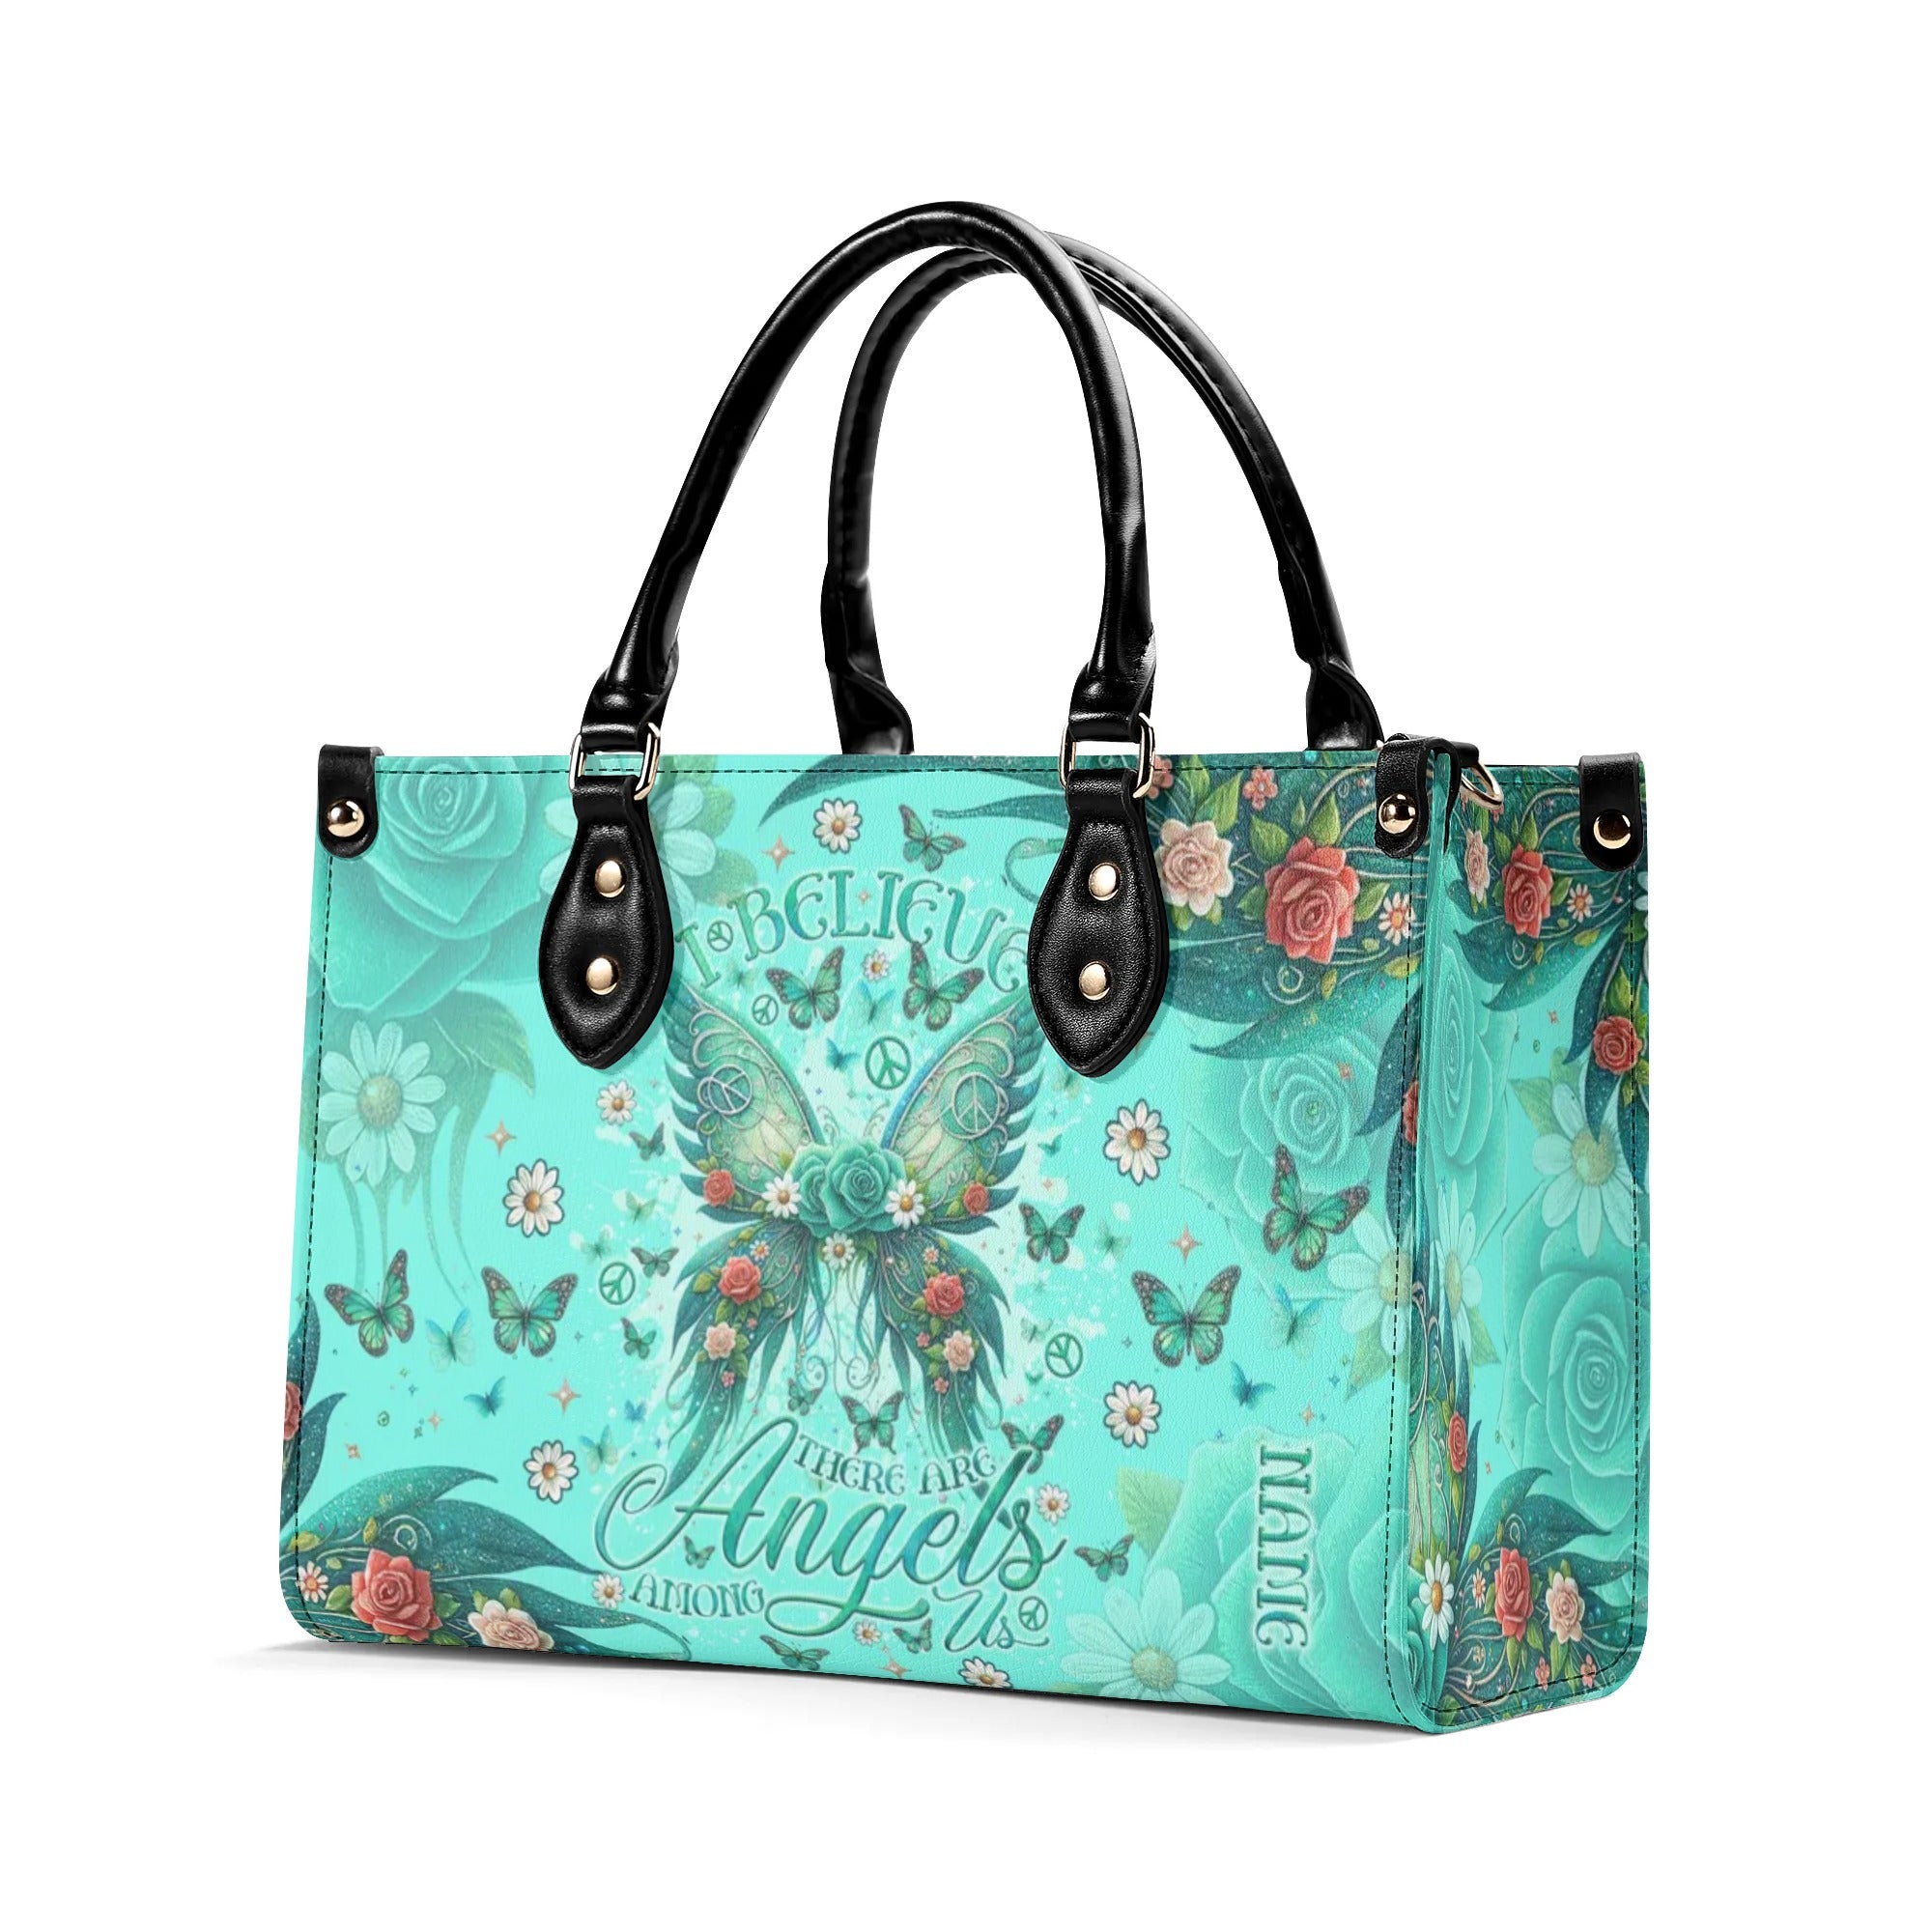 I BELIEVE THERE ARE ANGELS AMONG US WINGS LEATHER HANDBAG - TLNO3003241